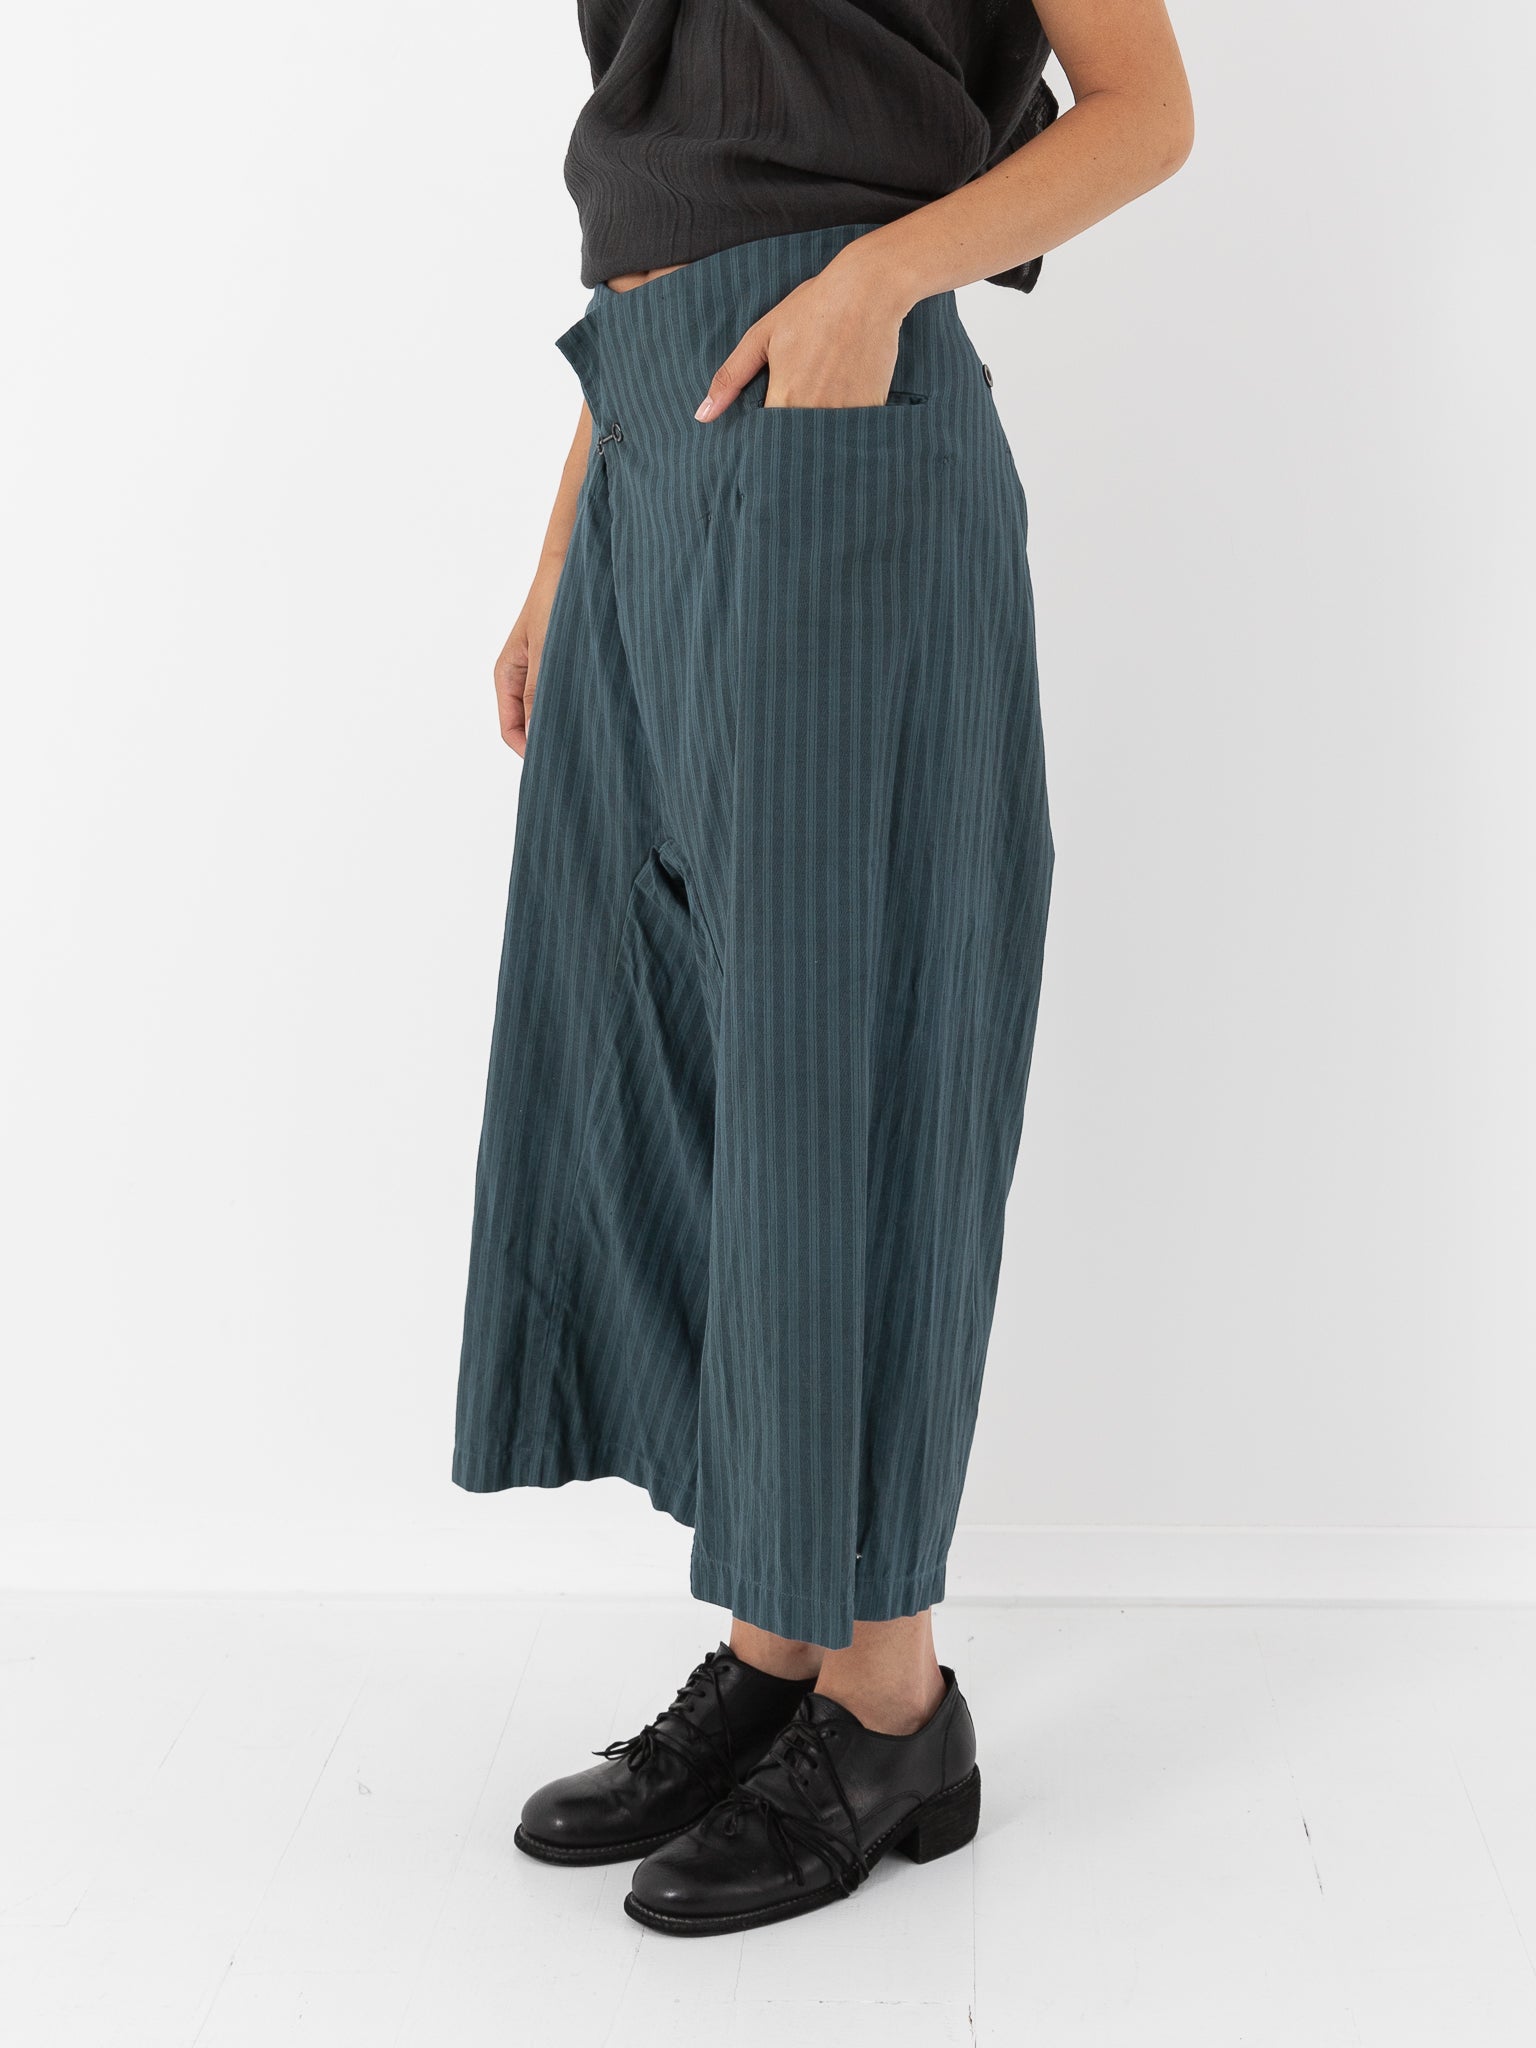 Atelier Suppan Front Crossed Trouser, Dark Stripe - Worthwhile